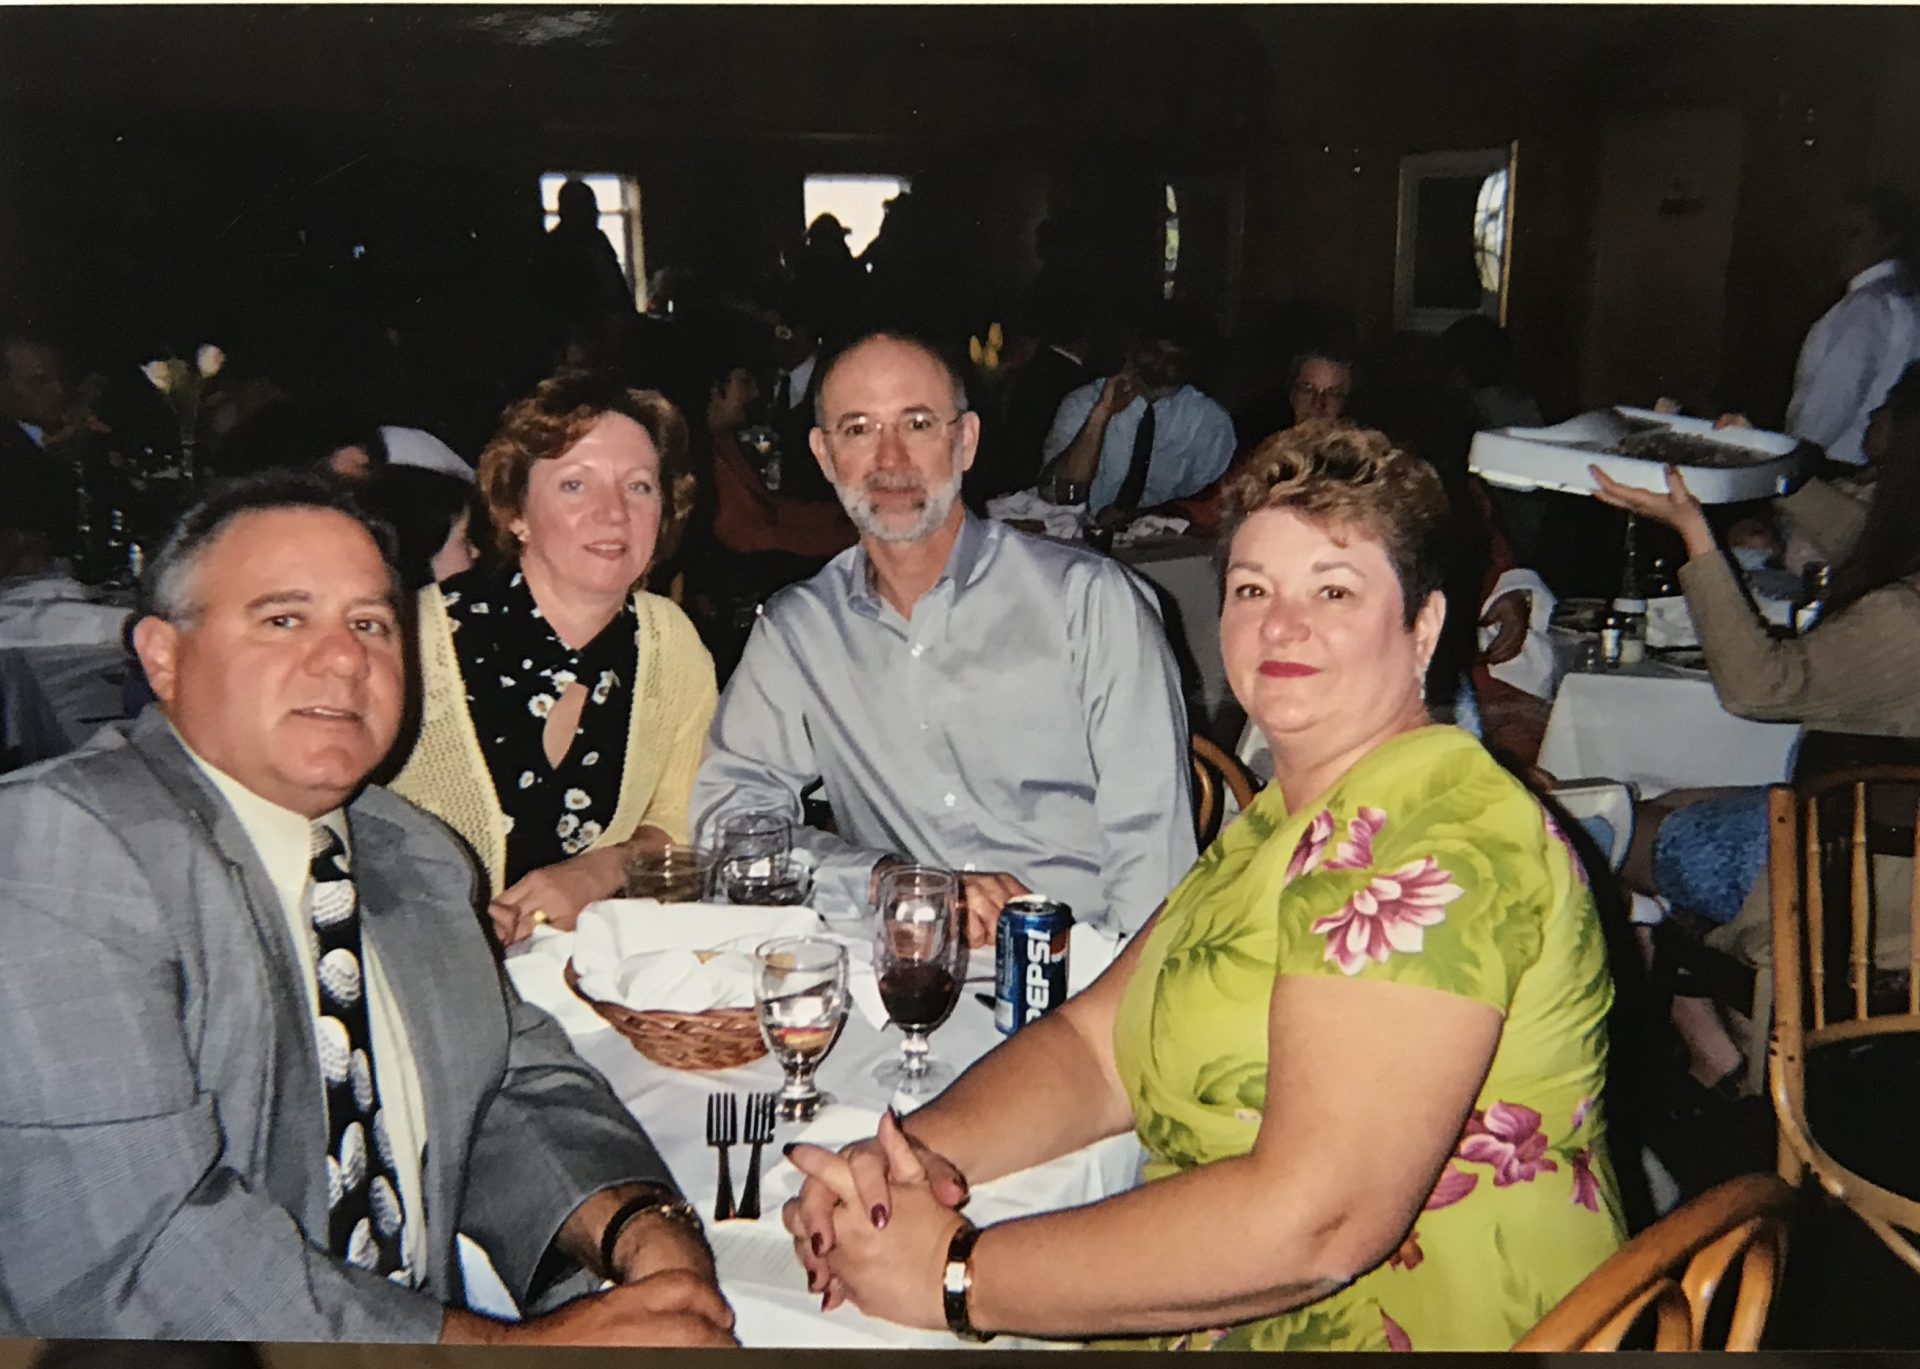 Jimmy Infantino, Brenda Double, Dennis Double and Diane Infantino.  May 3, 2003, Cindy and Andy Callaghan’s wedding